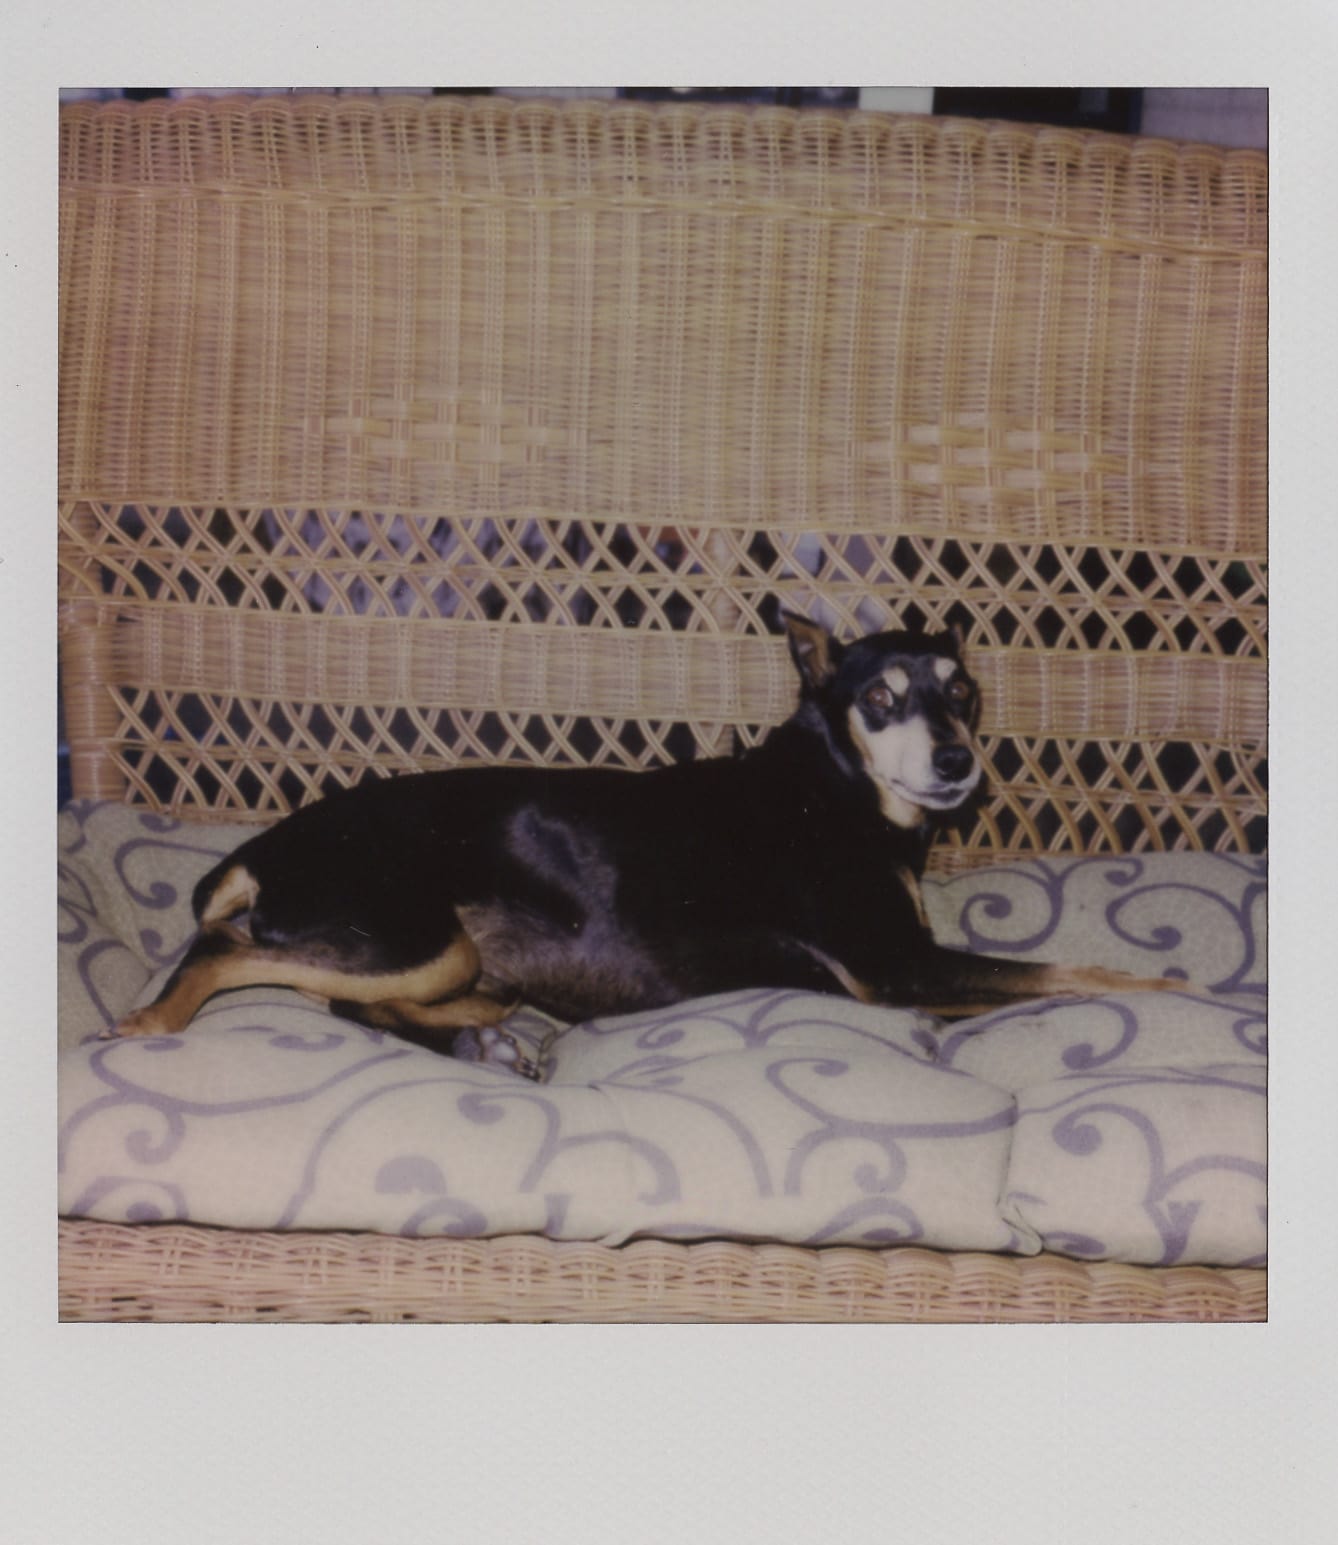 Gambit relaxing outside during his last days Polaroid photos